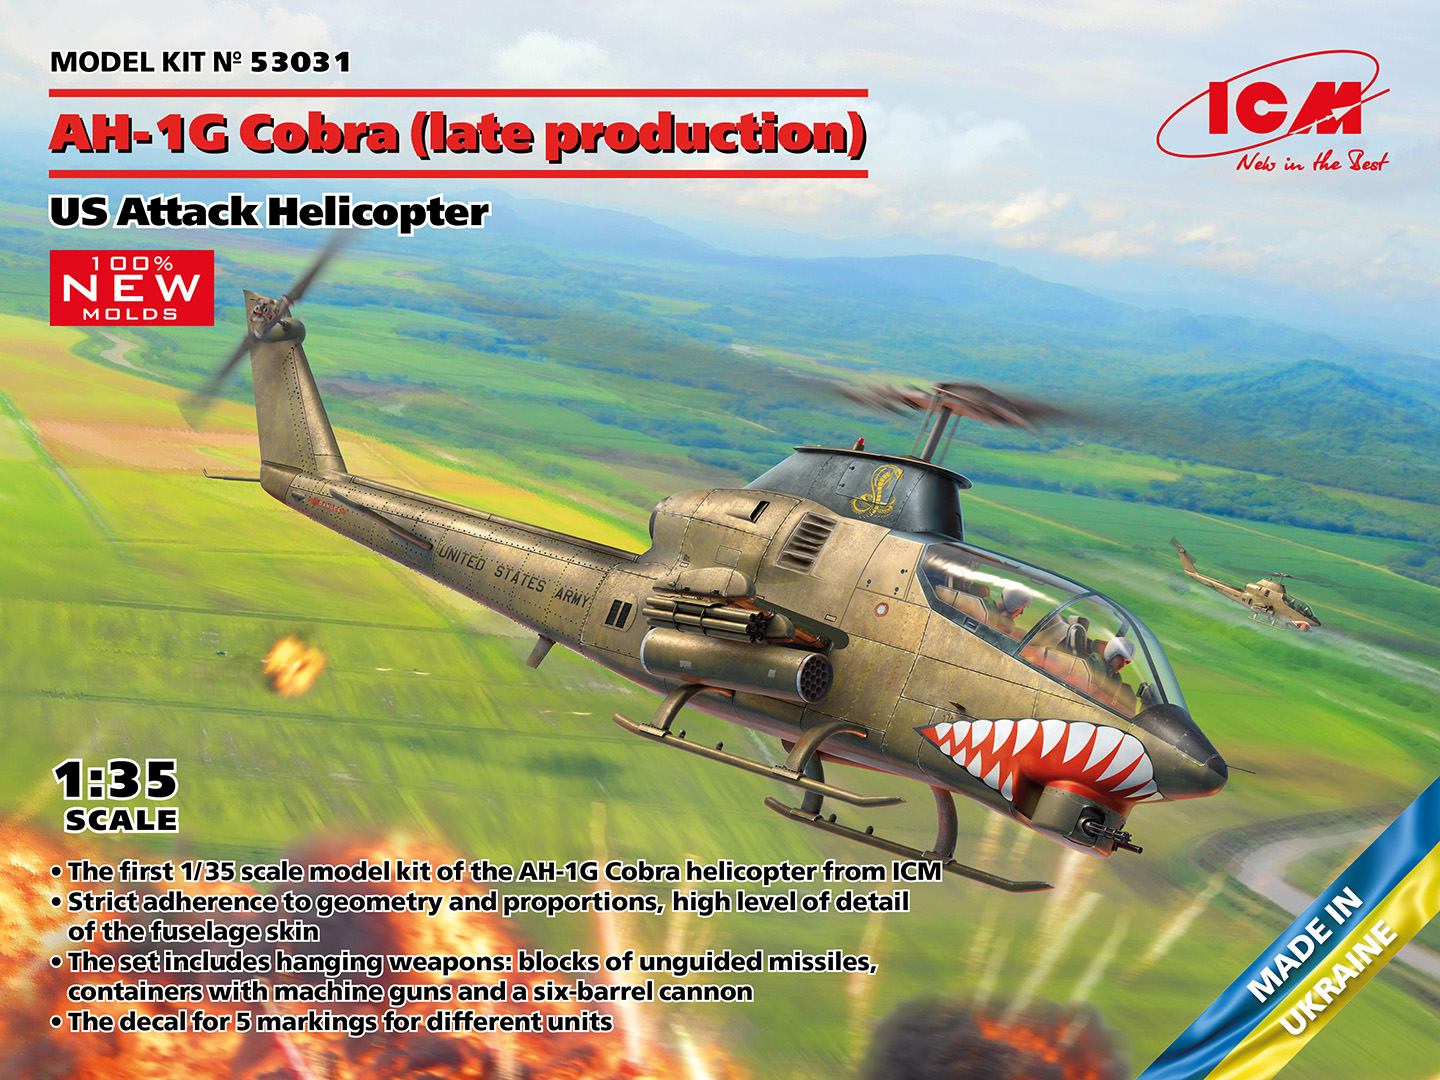 Fotografie 1/35 AH-1G Cobra (late production), US Attack Helicopter (100% new molds)